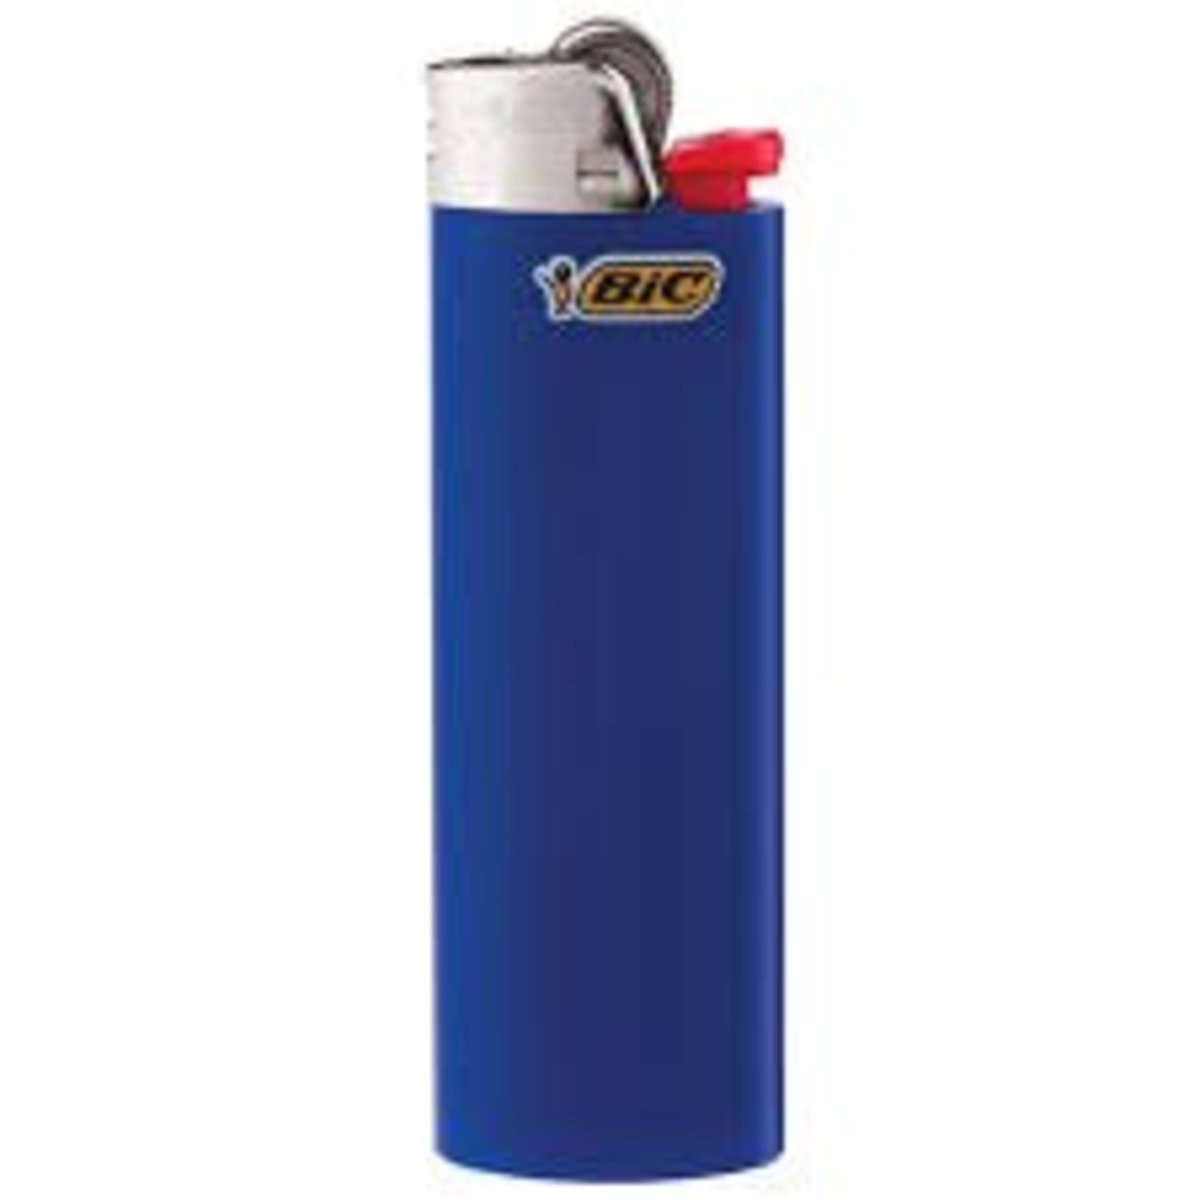 BIC—never underestimate the power of a flame.